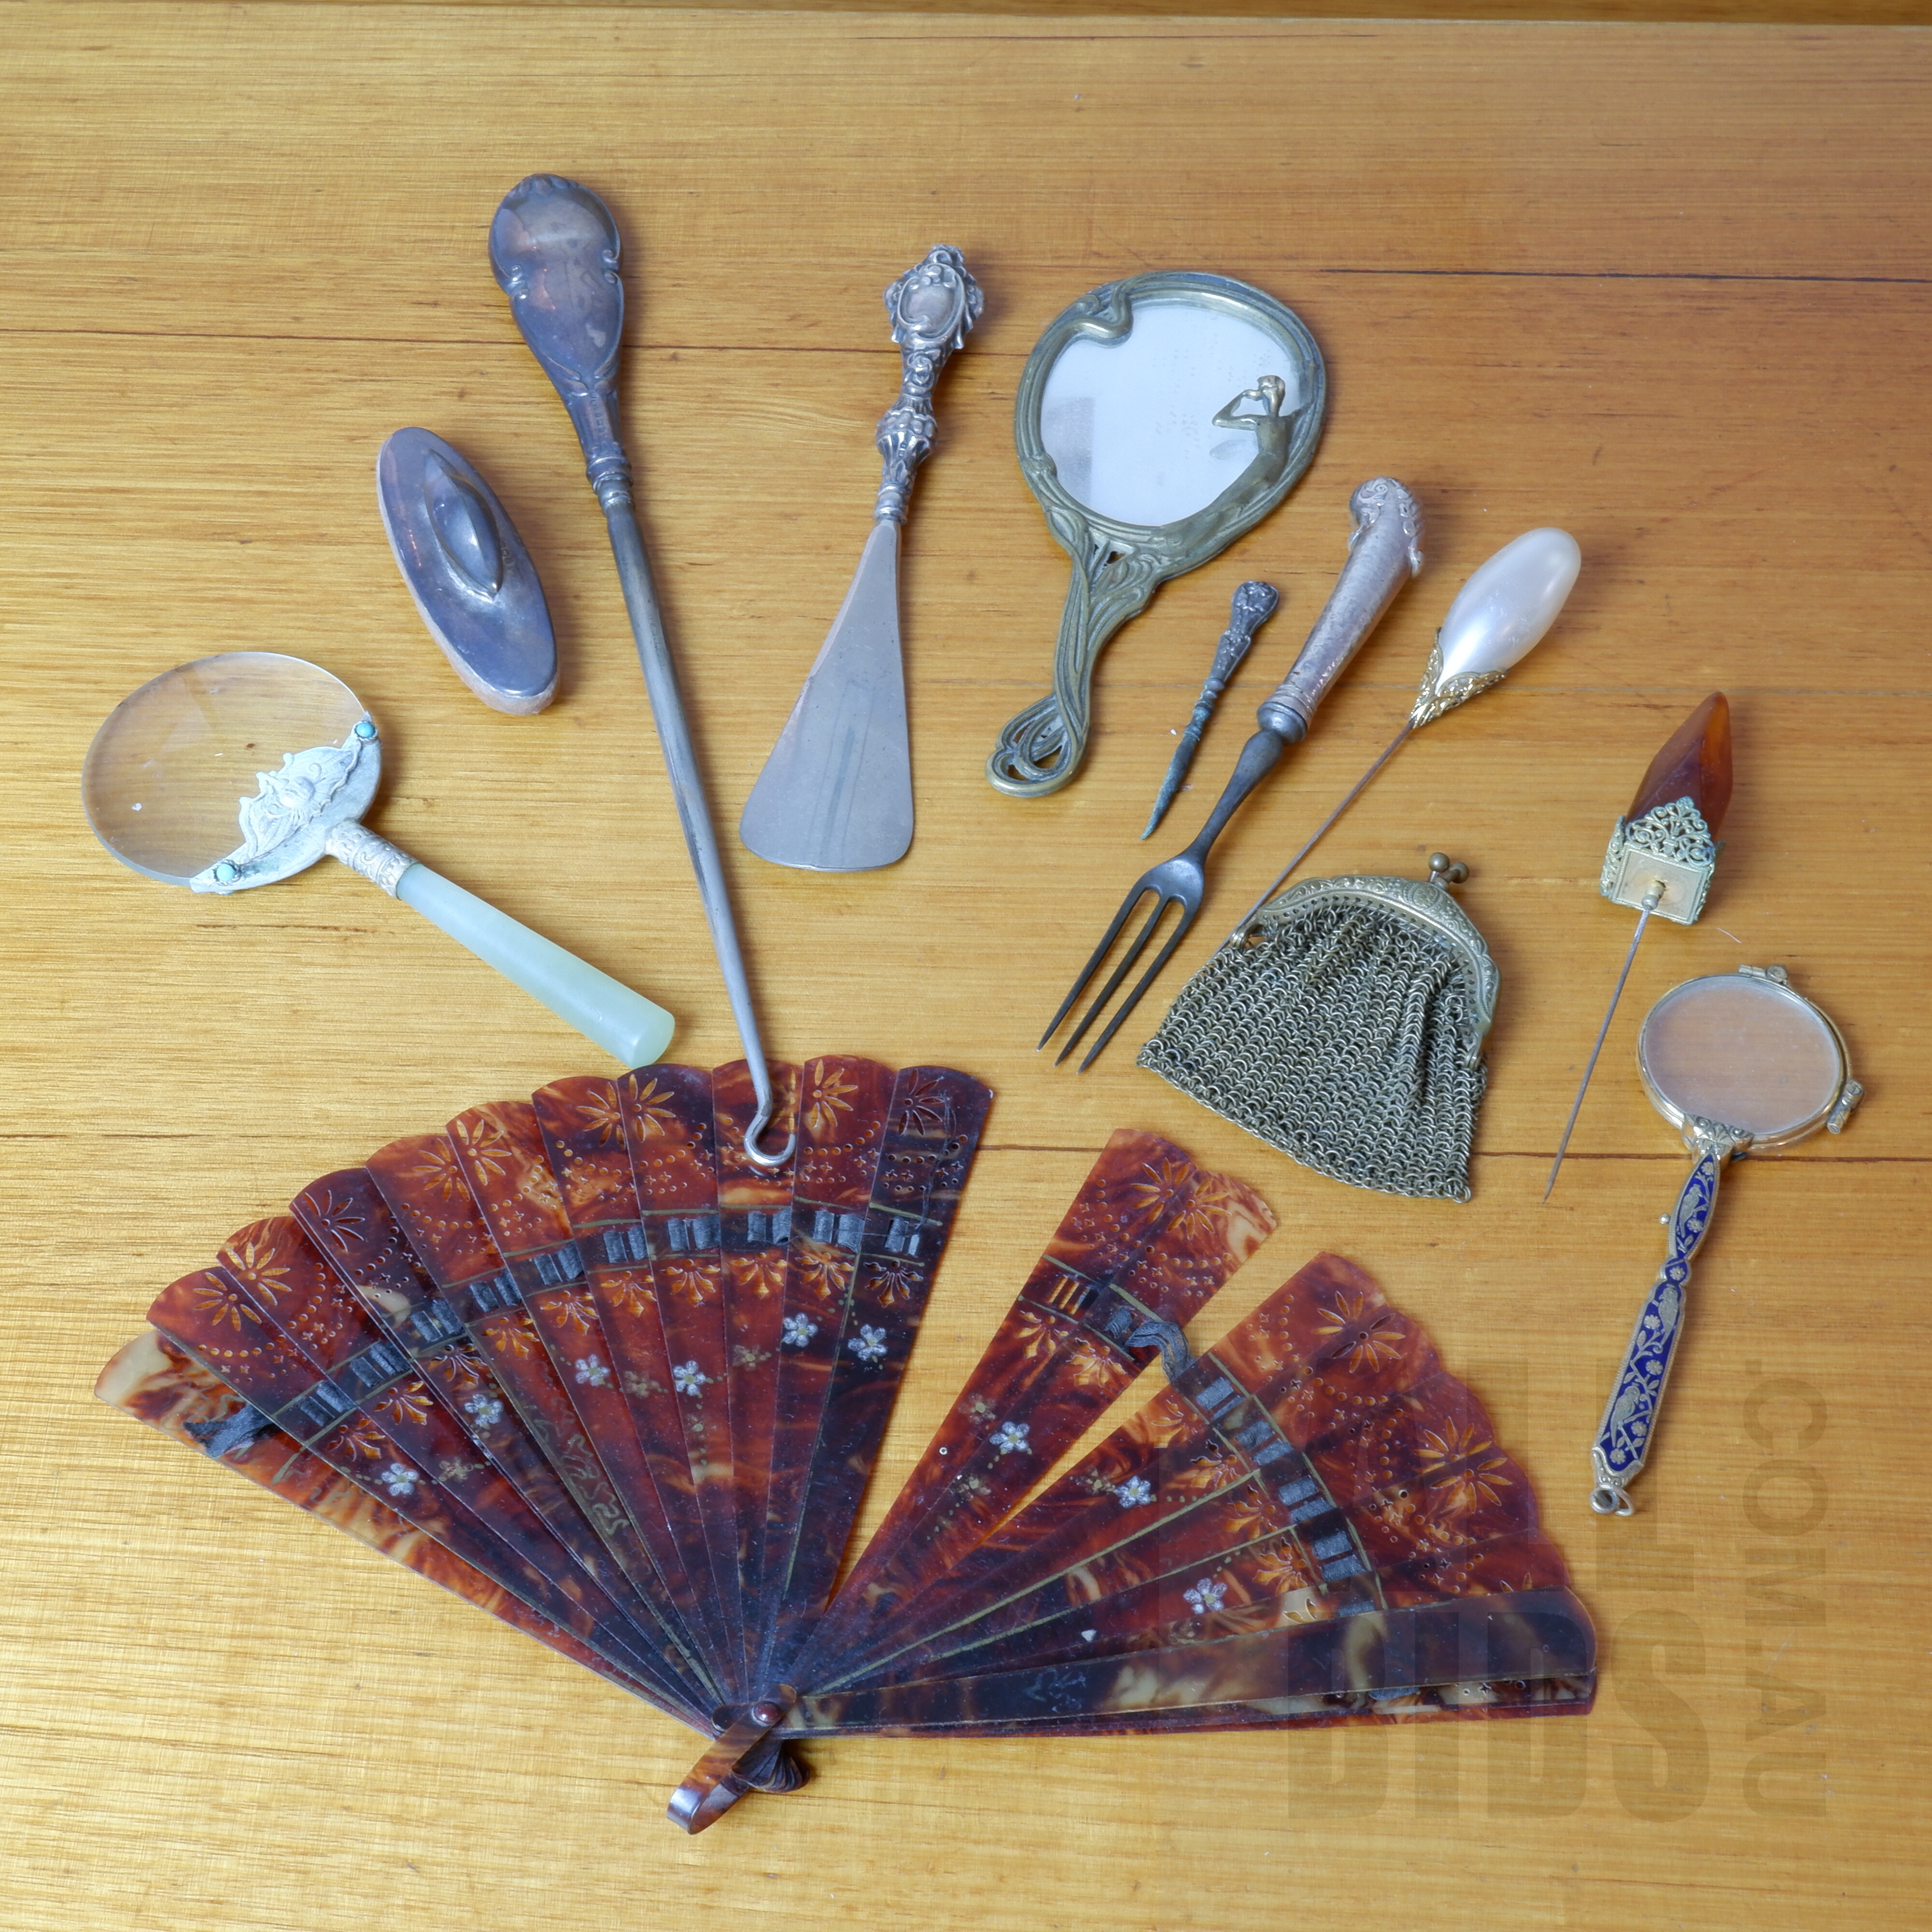 'Antique Sterling Silver Handled Shoe Horn and Button Hook, Art Nouveau Cast Brass Miniature Mirror, Tortoise Shell Fan and More'